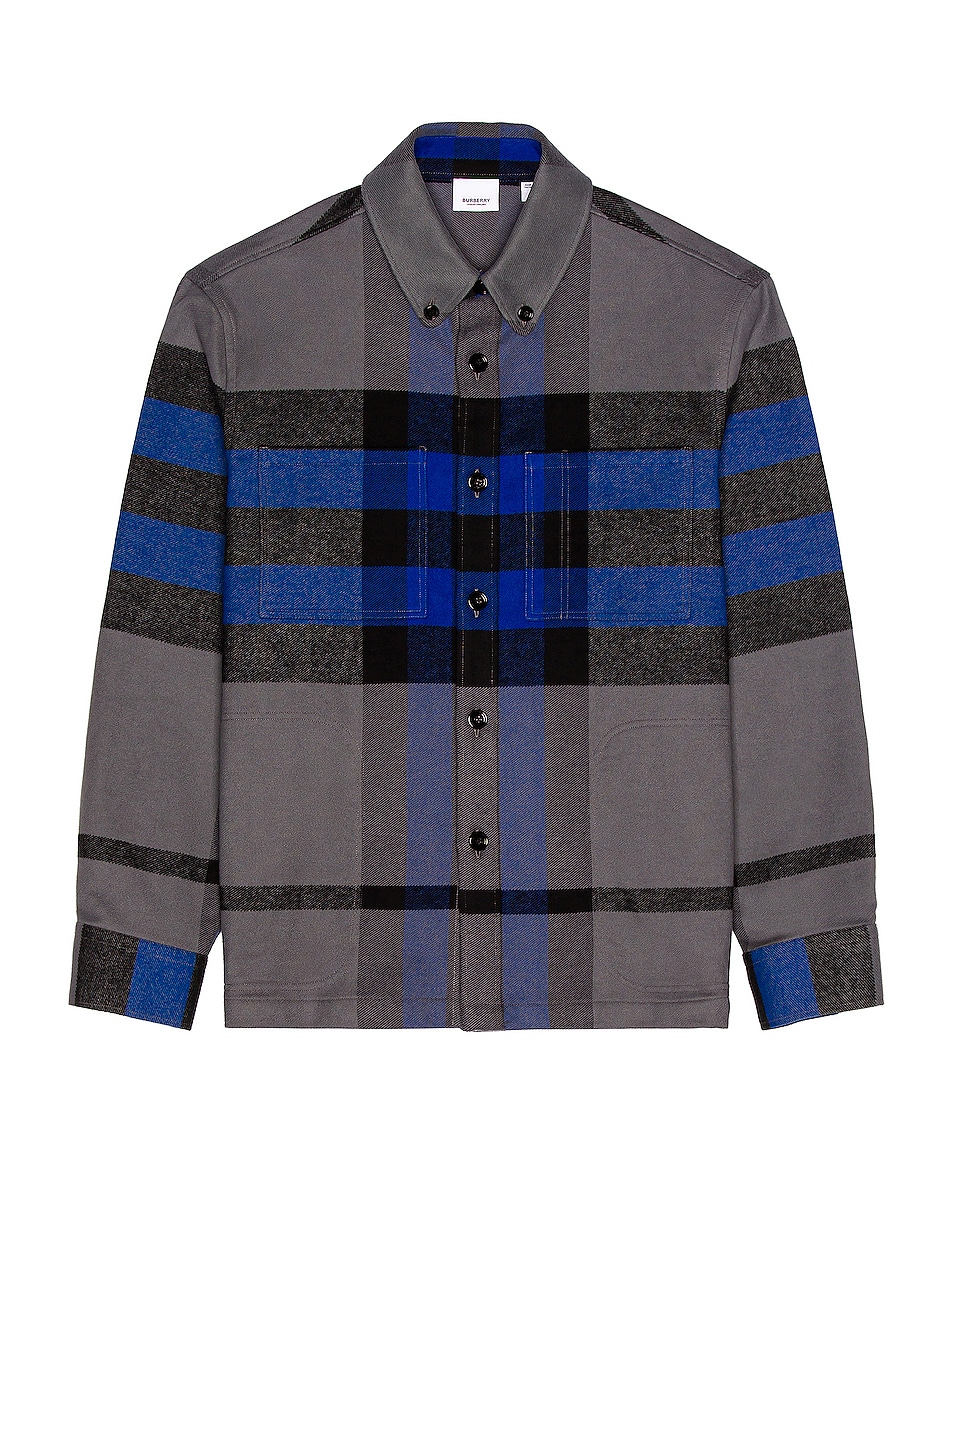 Image 1 of Burberry Owmby Shirt in Oceanic Blue Check